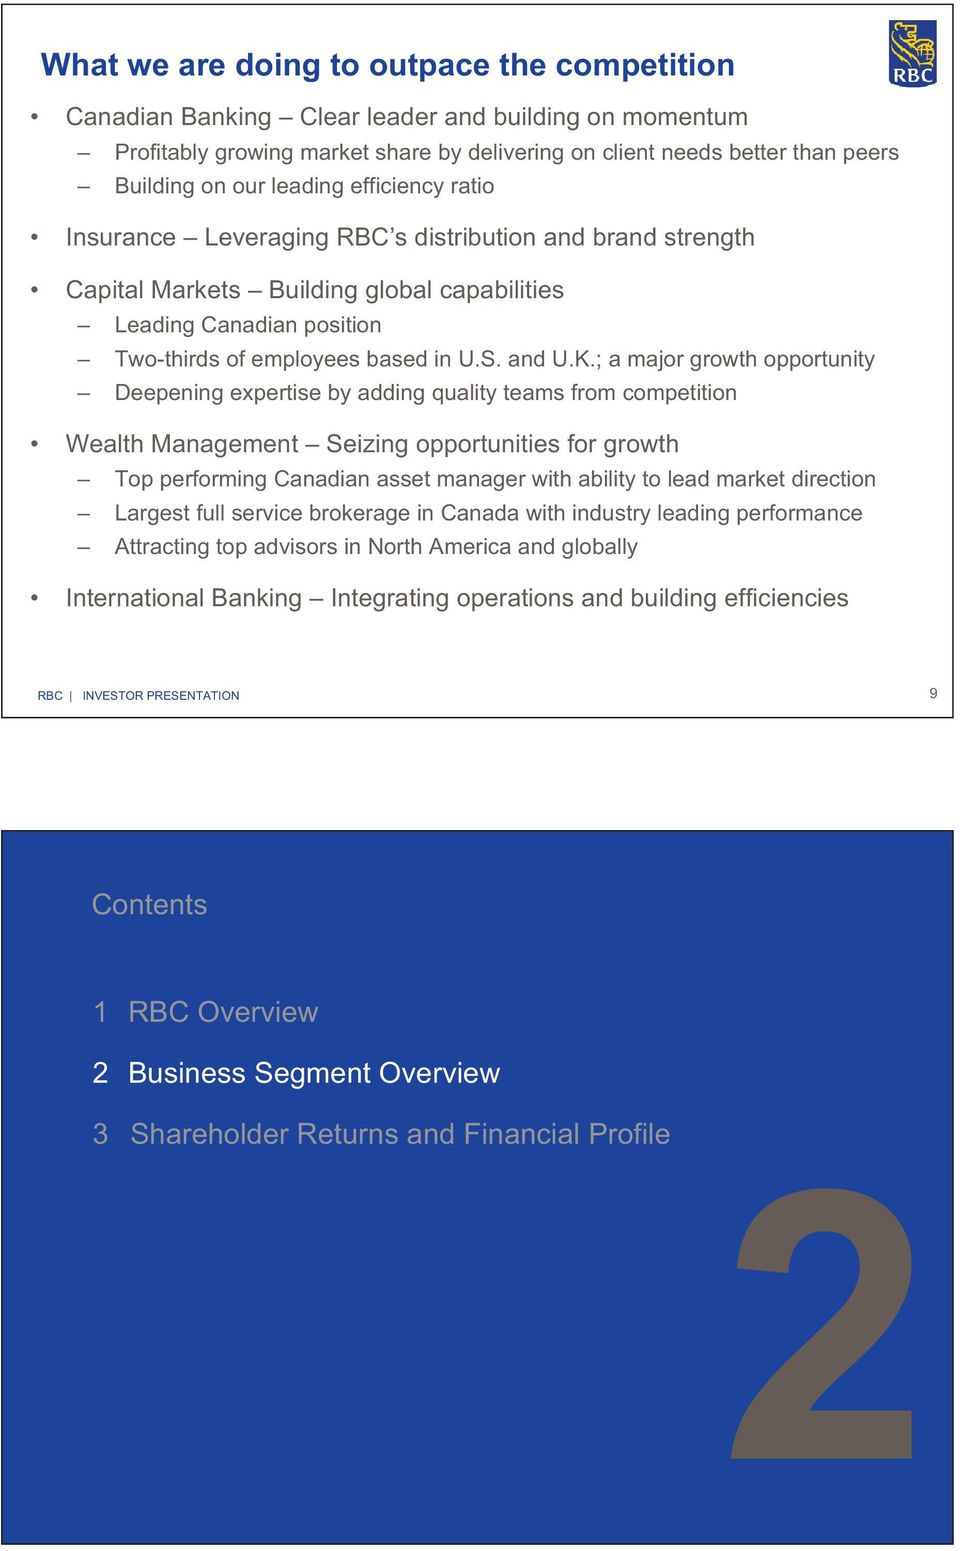 K.; a major growth opportunity Deepening expertise by adding quality teams from competition Wealth Management Seizing opportunities for growth Top performing Canadian asset manager with ability to